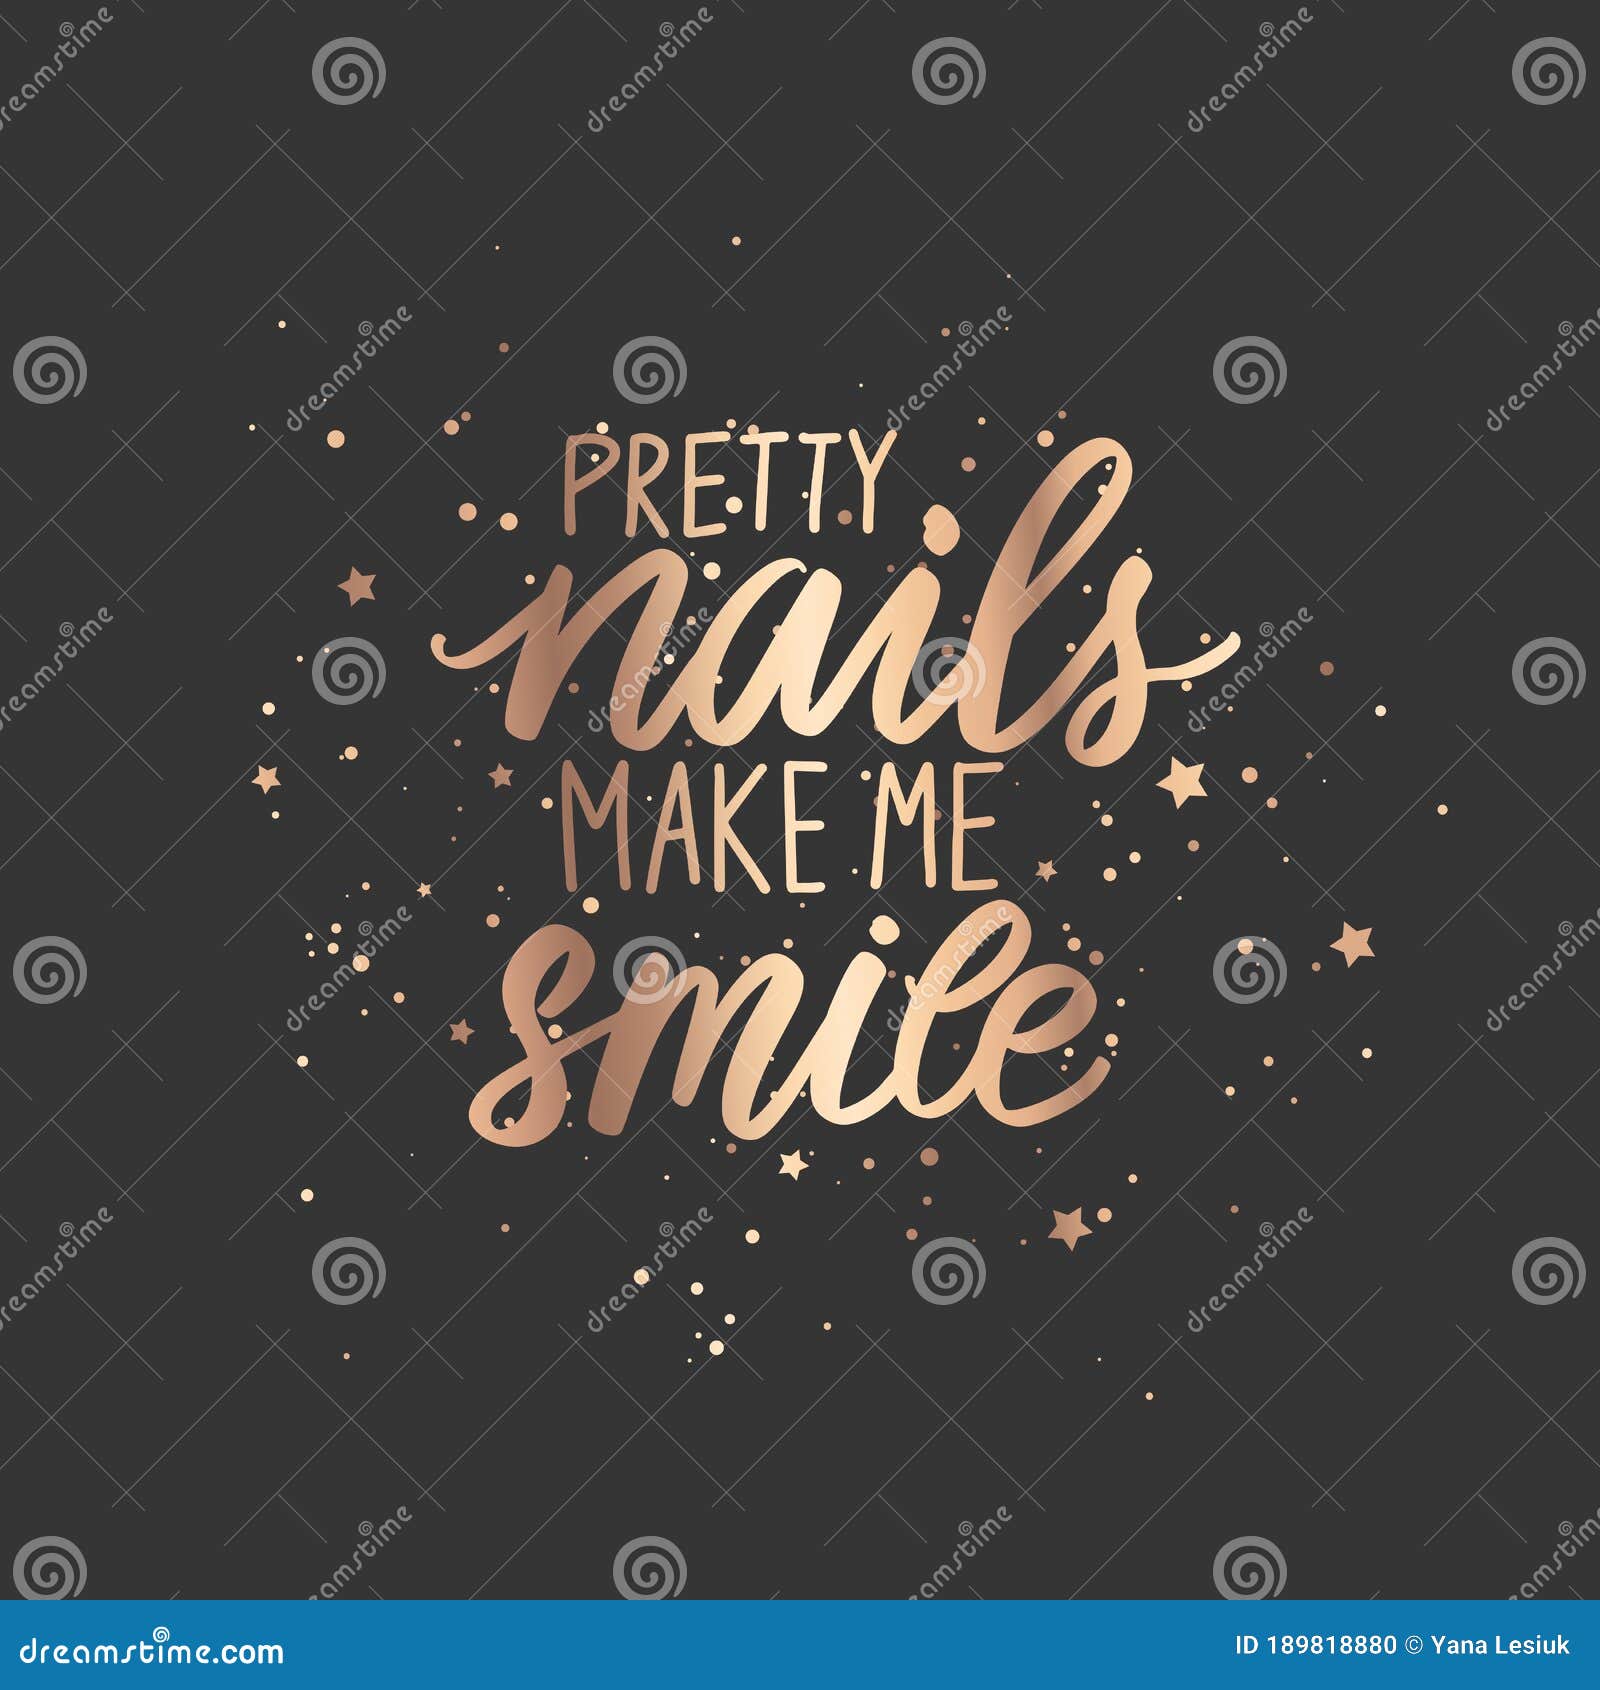 Handwritten Lettering Set About Nails Nail Stock Vector (Royalty Free)  1722185059 | Shutterstock